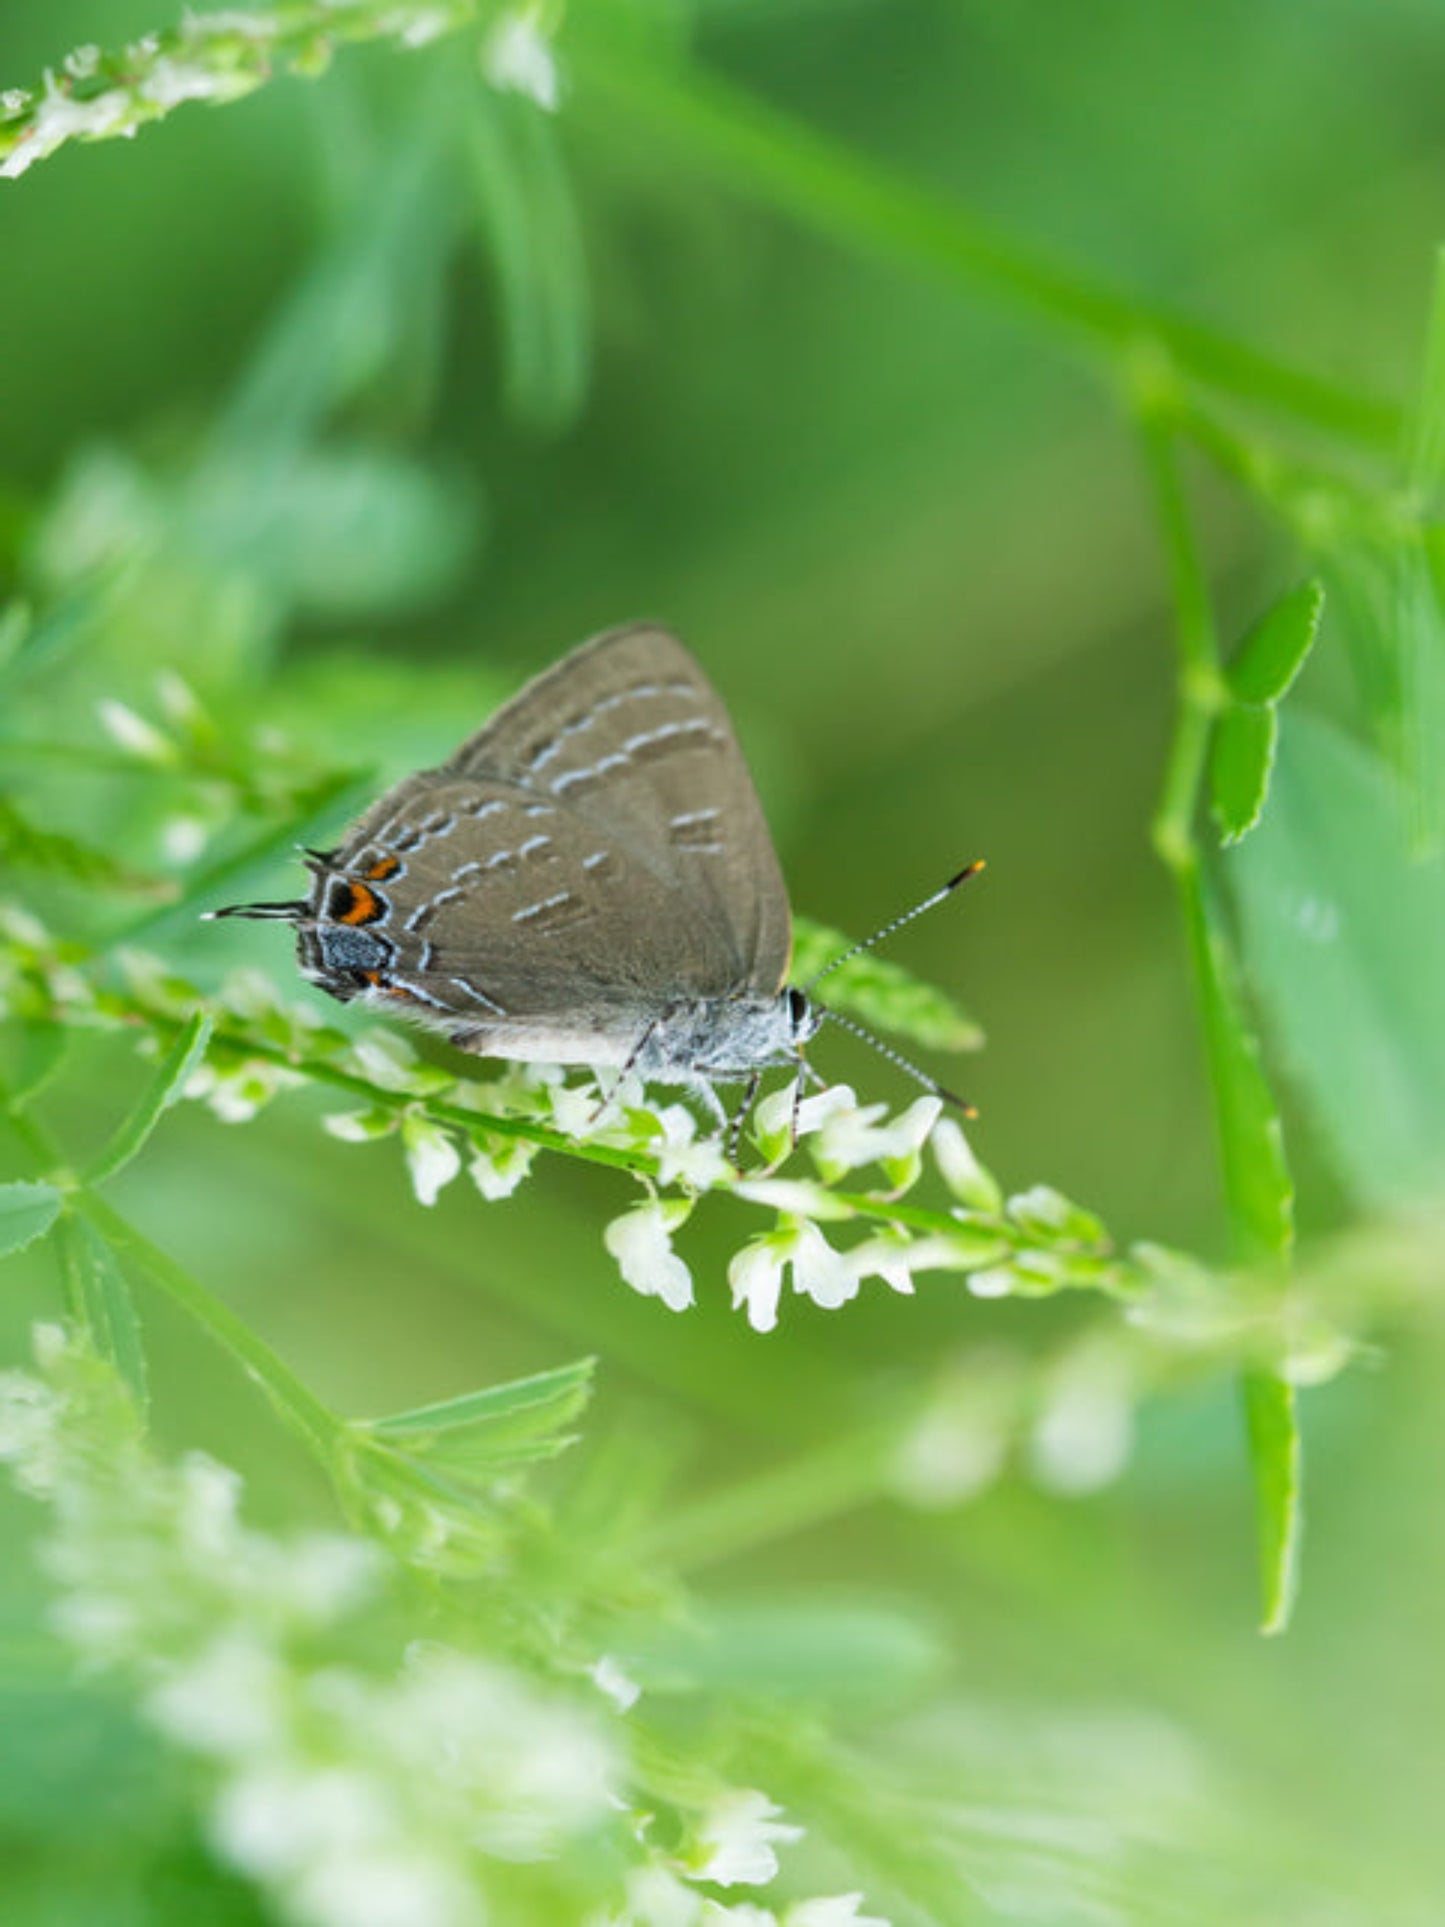 banded hairstreak butterfly uses Quercus michauxii oak as host plant